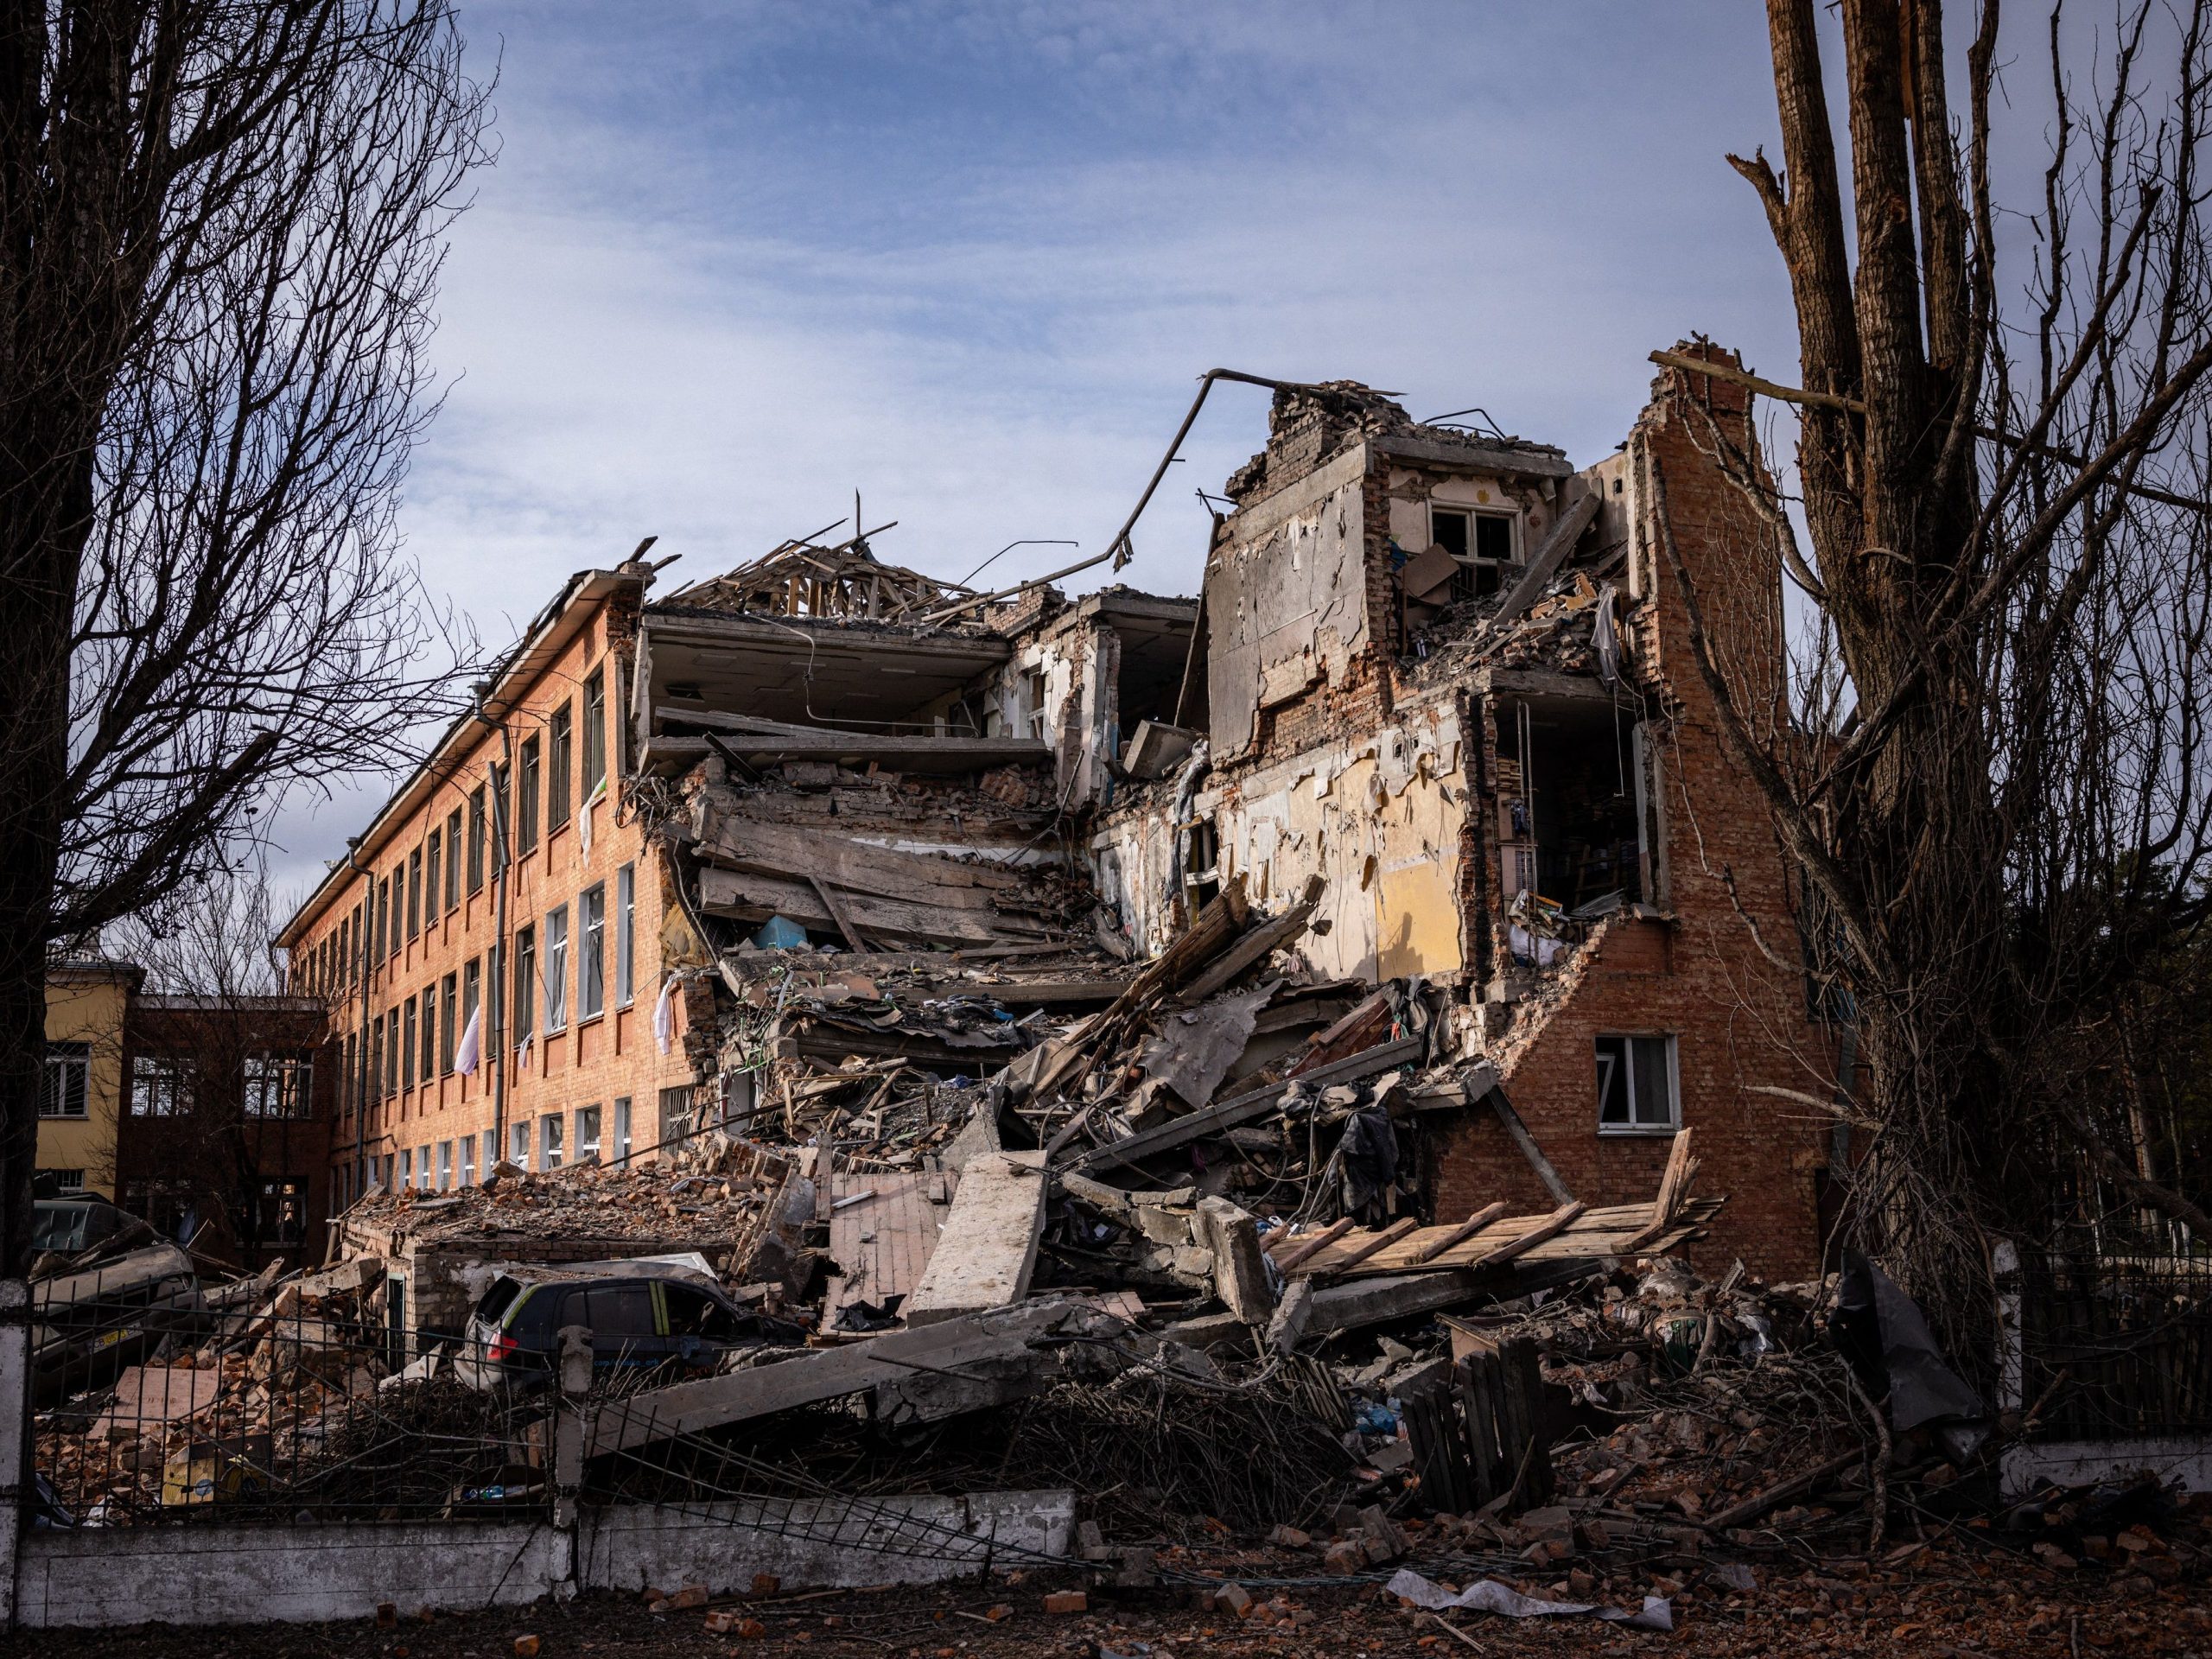 A school building damaged in the northern Ukrainian city of Chernihiv on March 4, 2022.